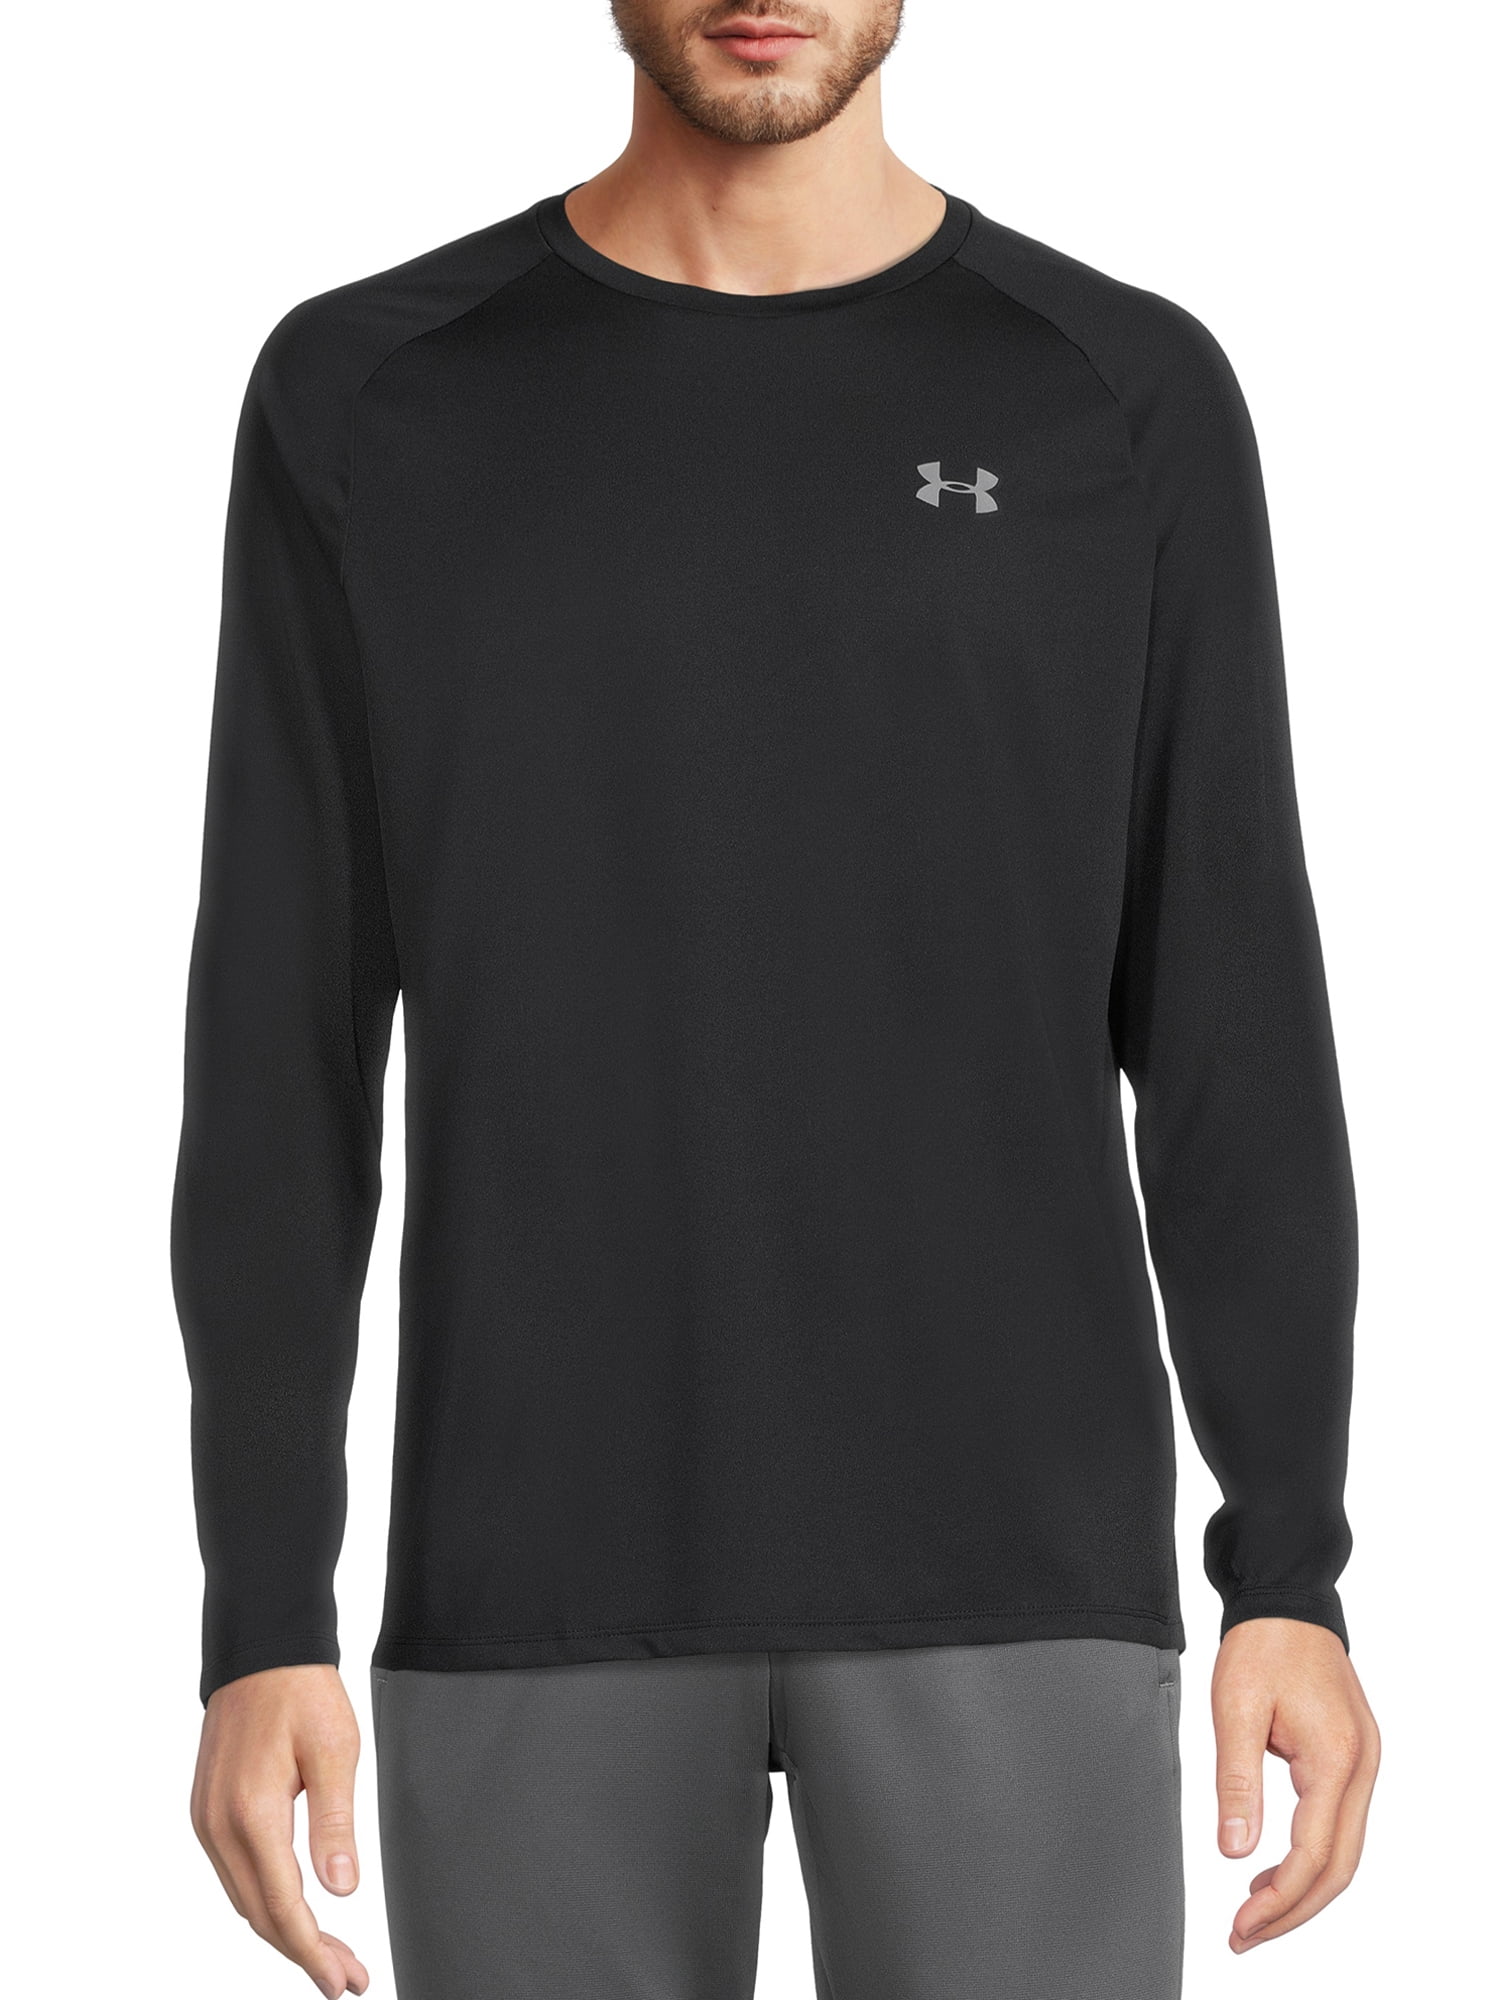 lips upper stride Under Armour Men's and Big Men's UA Tech T-Shirt with Long Sleeves, Sizes  up to 2XL - Walmart.com